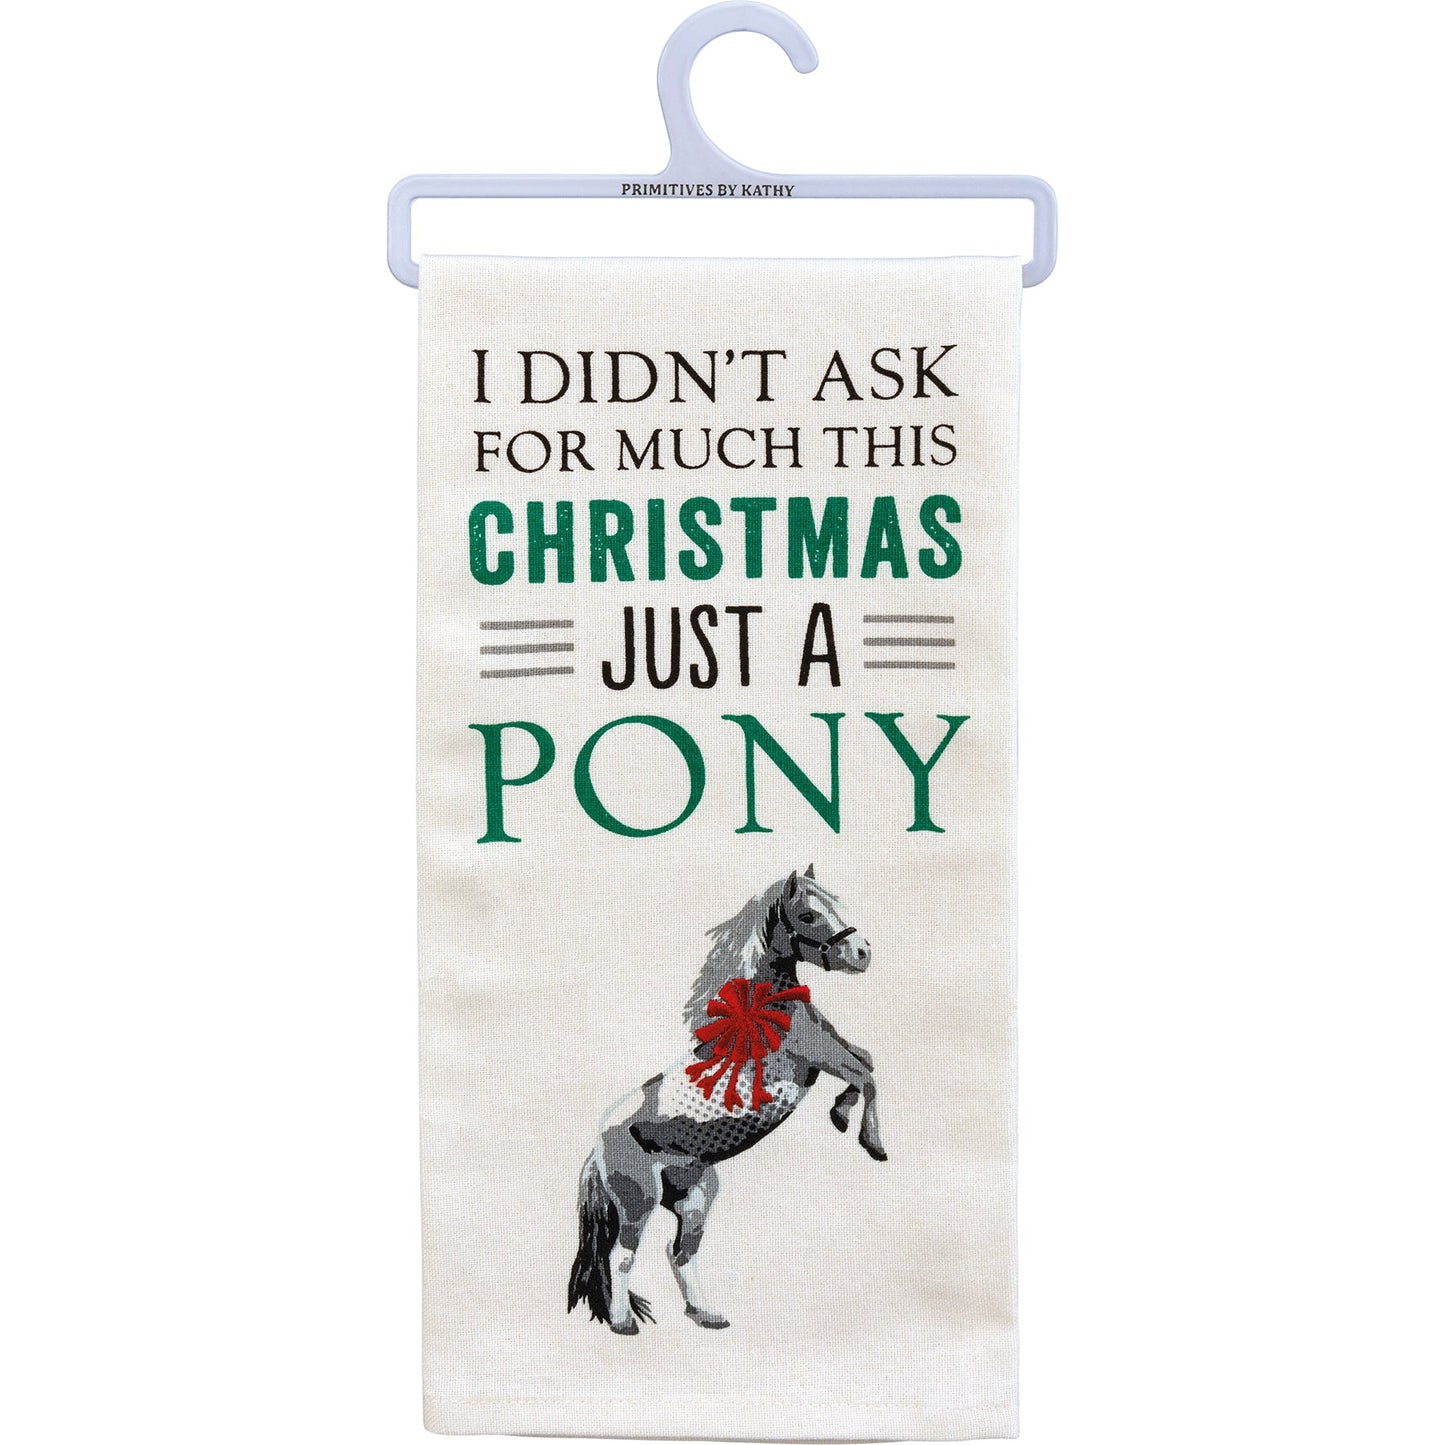 I Didn’t Ask For Much Just A Pony Dish Cloth Towel | Novelty Silly Tea Towels | Cute Kitchen Hand Towel | Christmas, Holidays | 18" x 26"